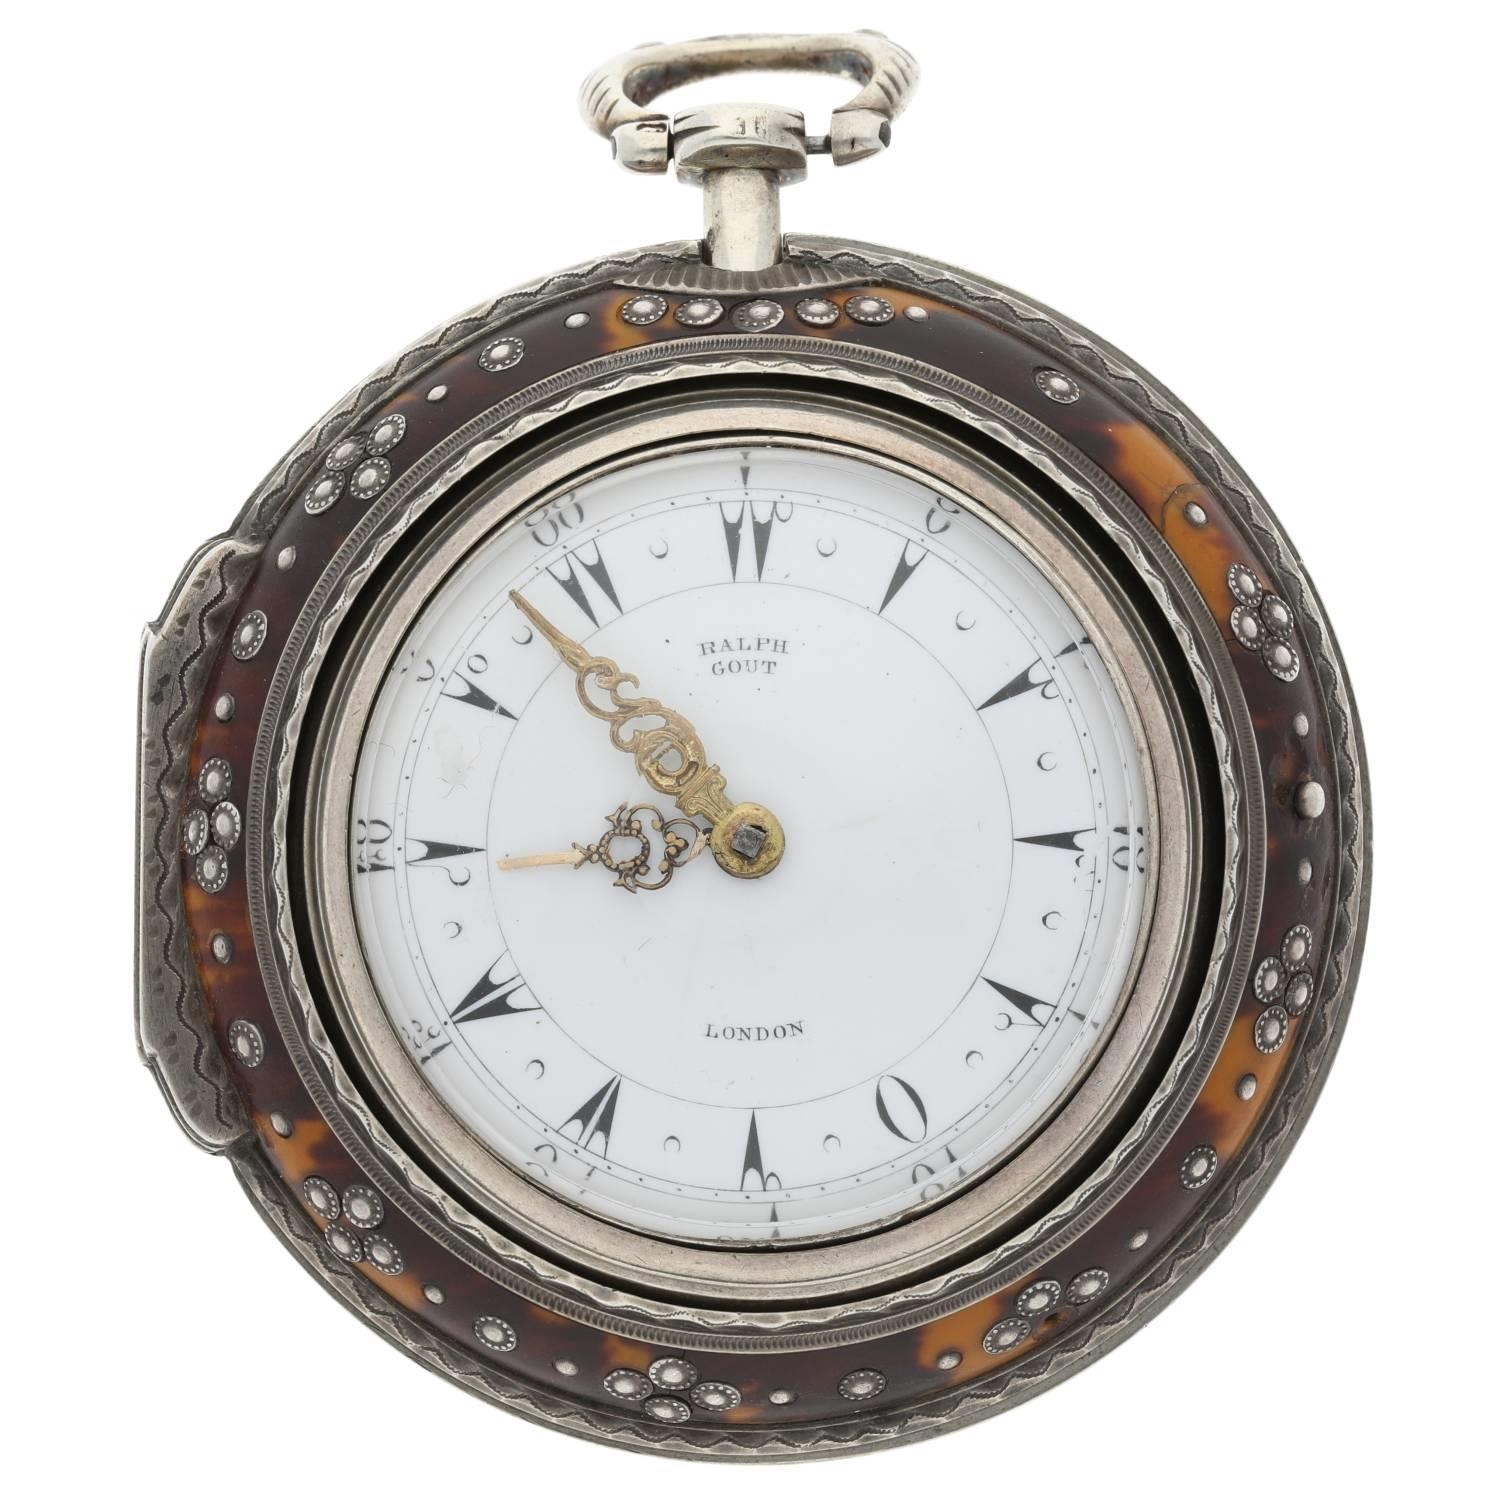 Ralph Gout, London - early 19th century silver and tortoiseshell triple cased verge pocket watch - Image 2 of 13